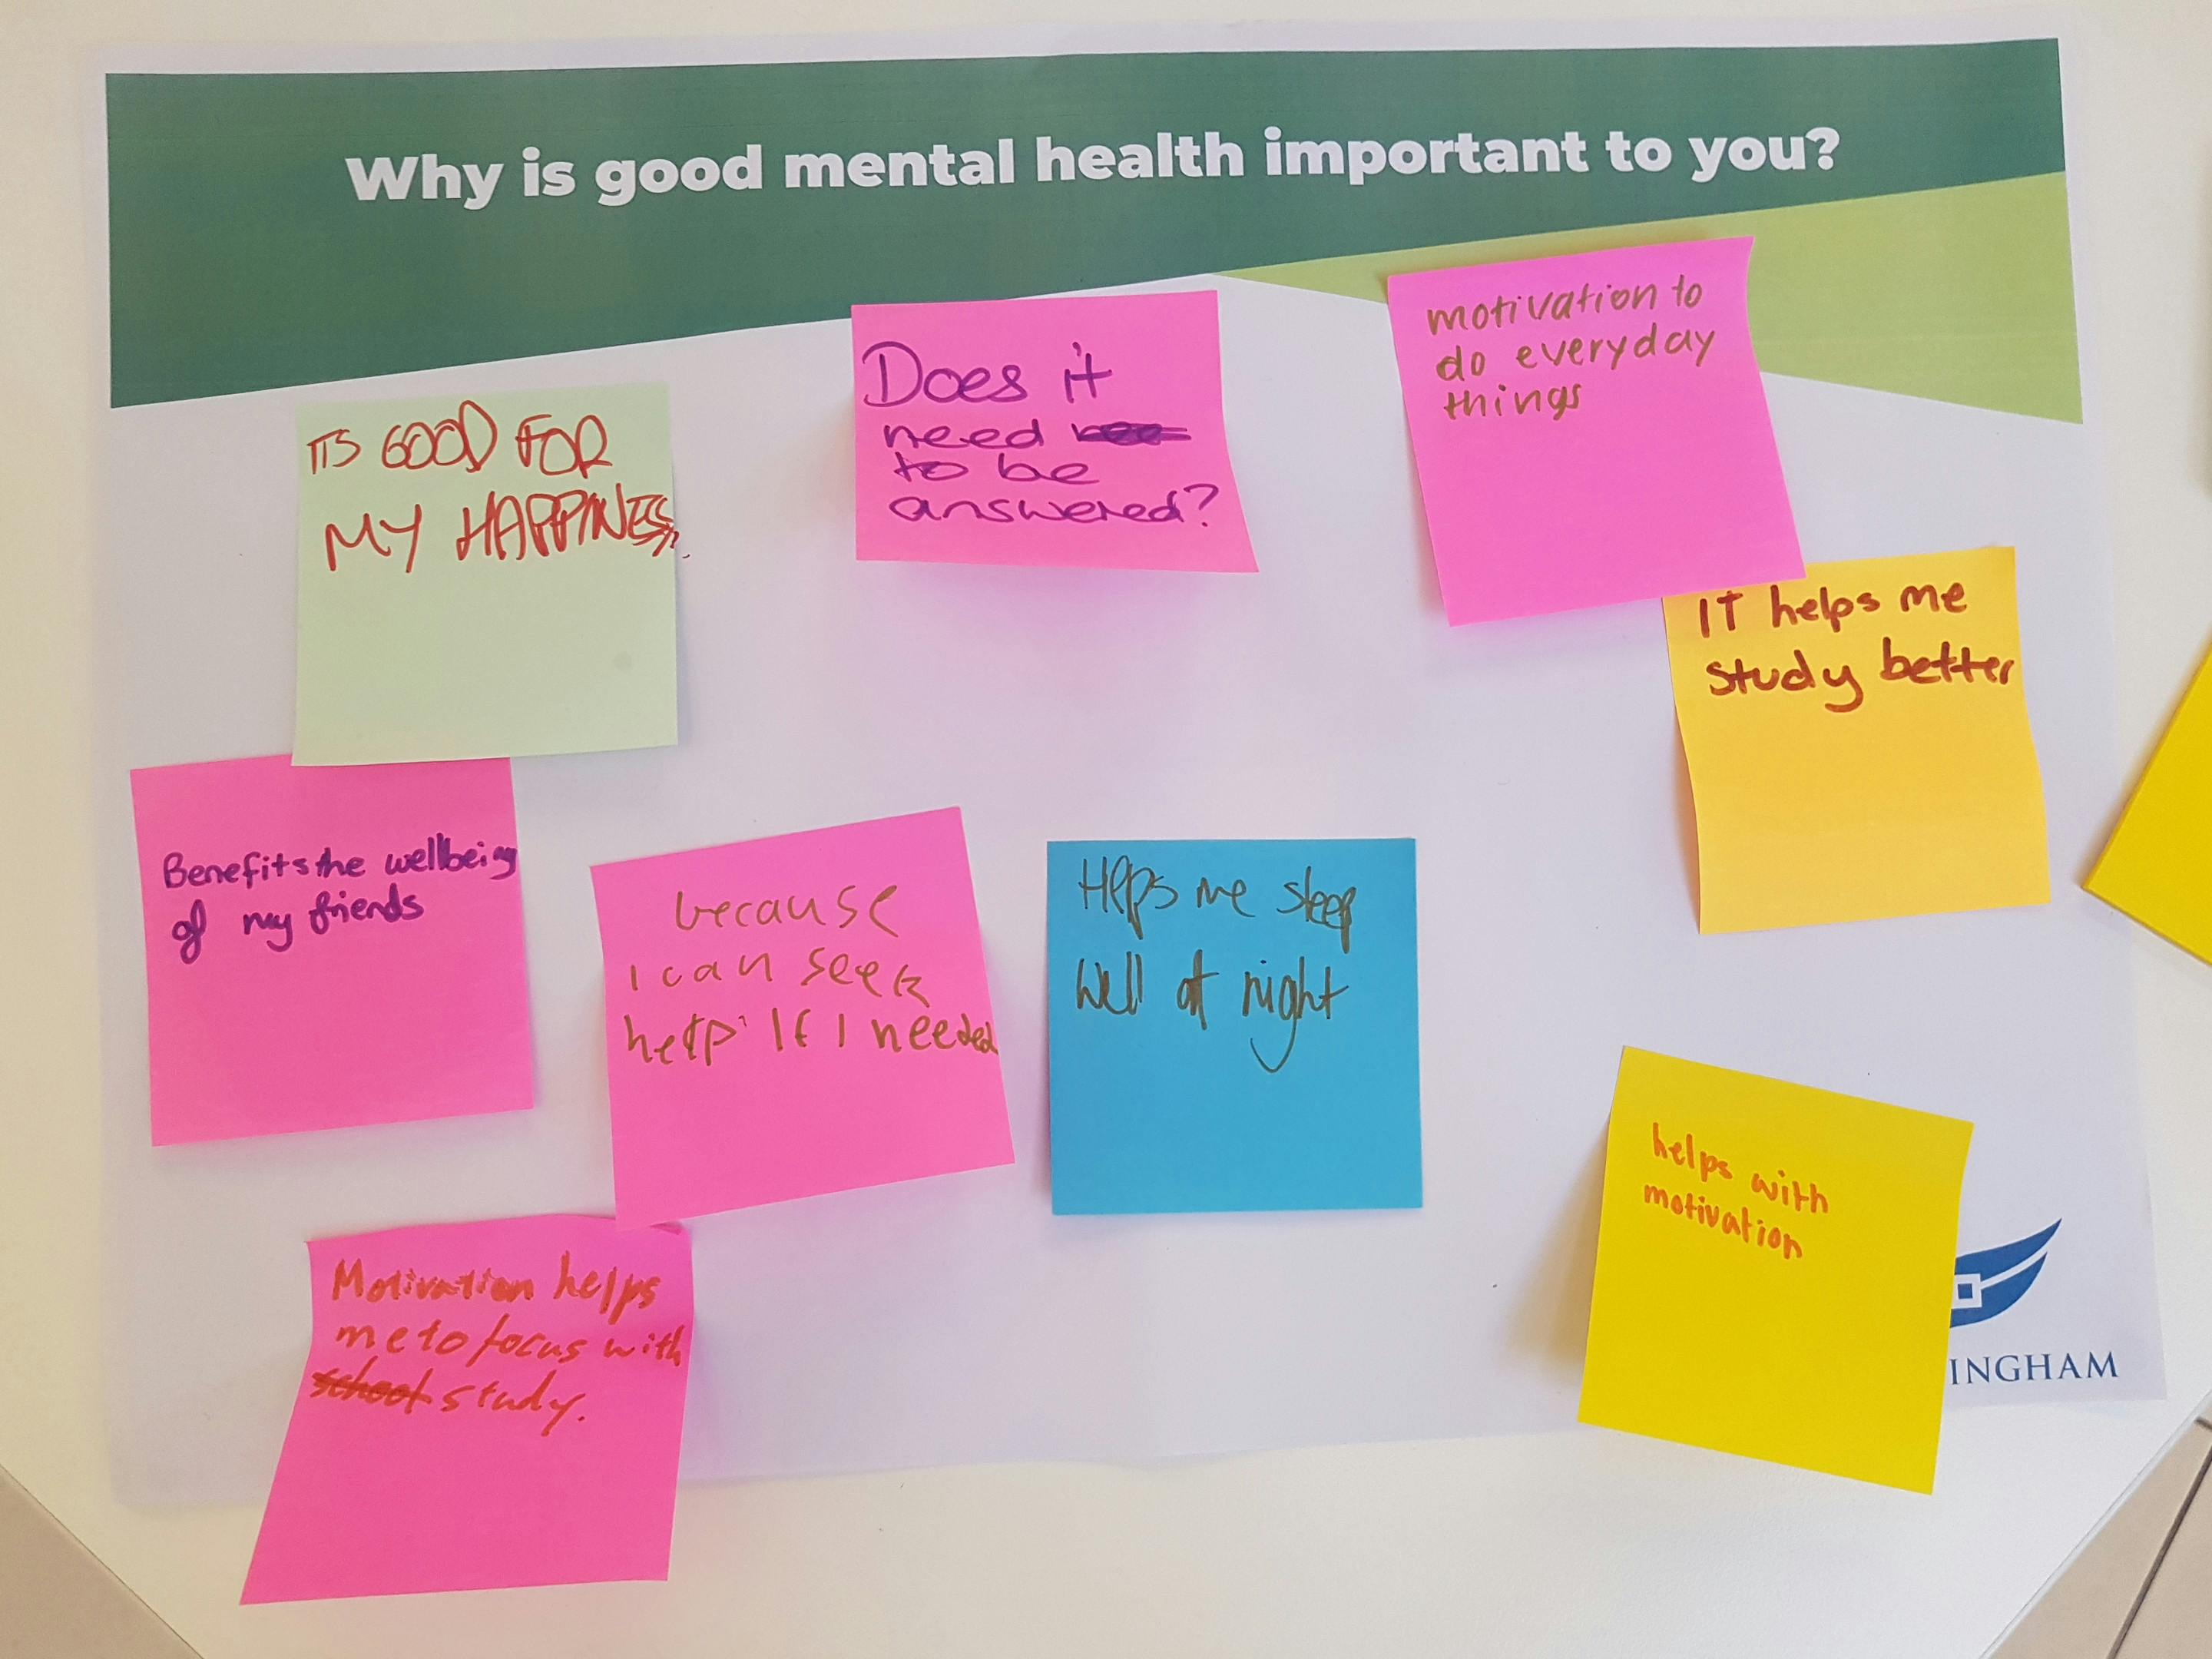 An information stall activity - tell us why good mental health is important to you